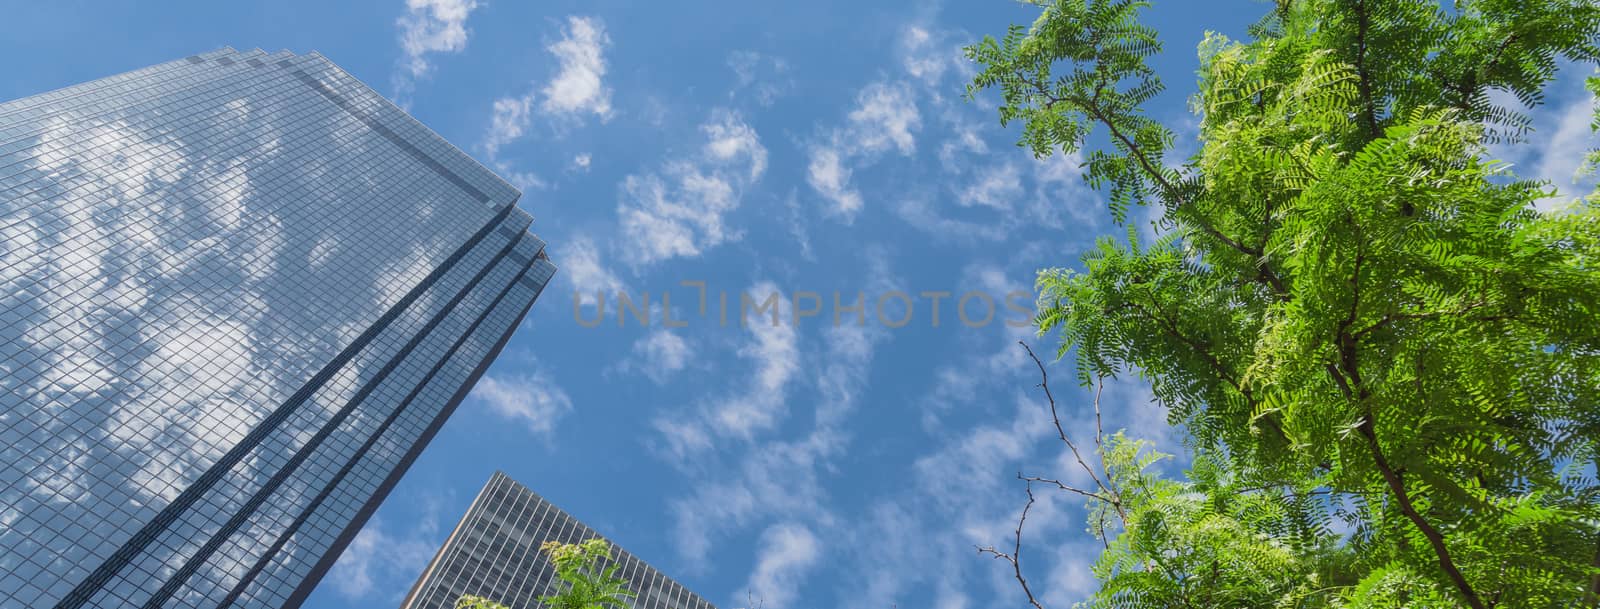 Panoramic low angle view of skyscrapers with trees under sunny cloud sky by trongnguyen